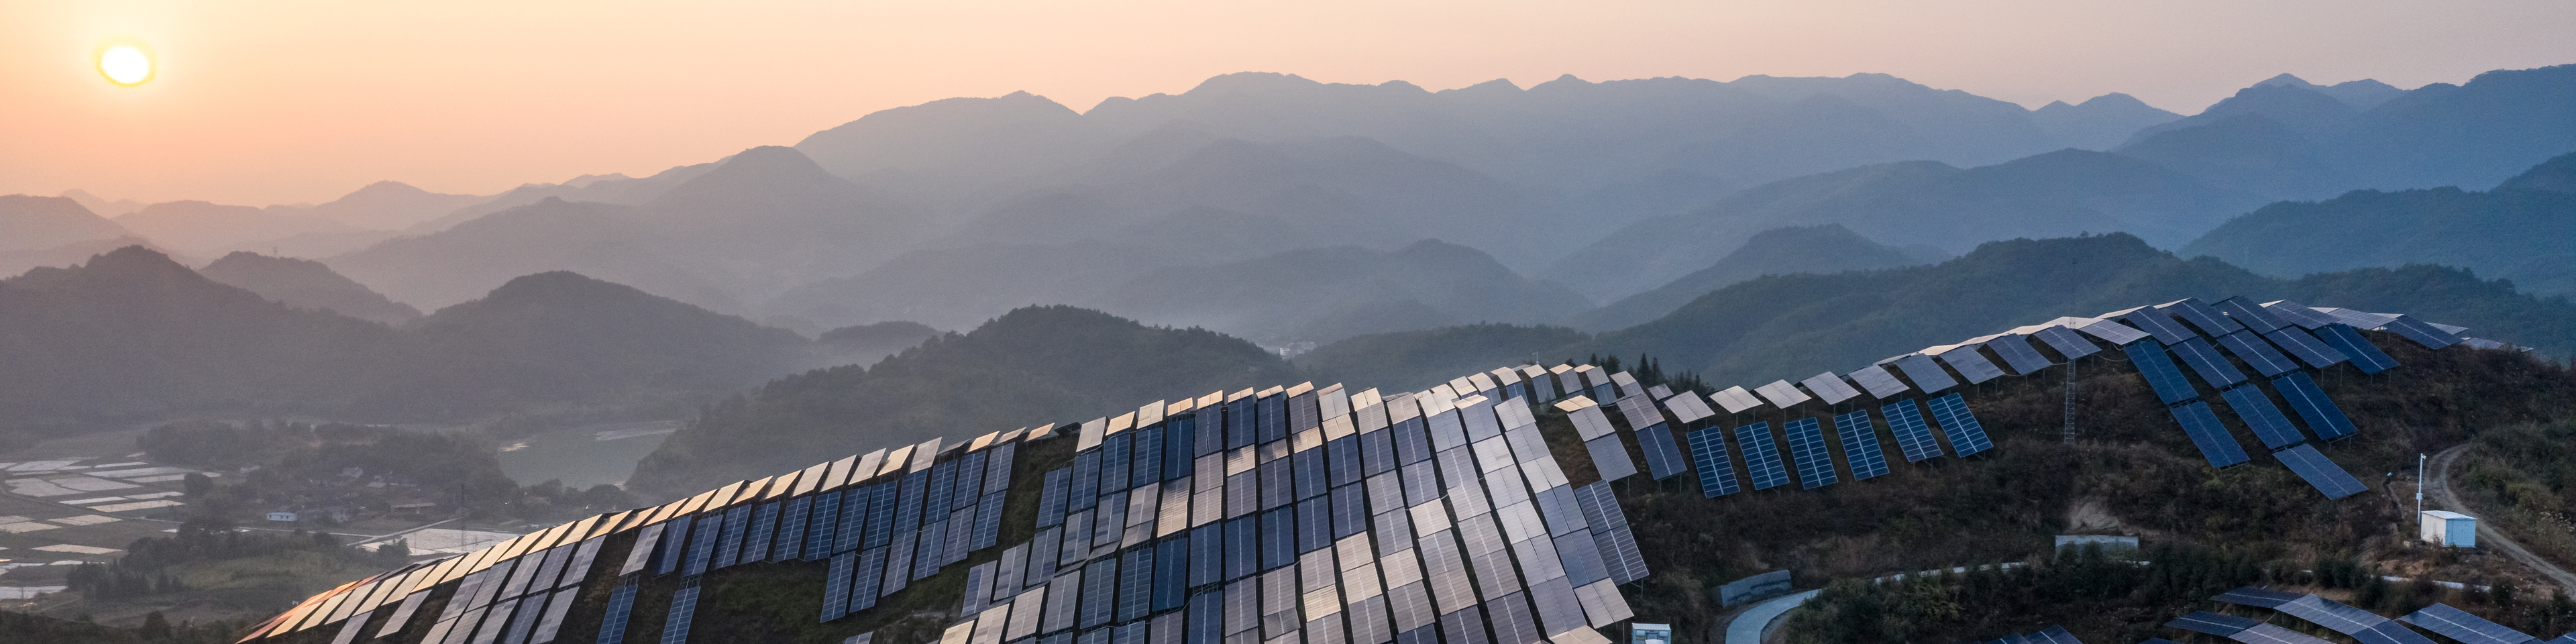 Aerial view of the solar power plant on the top of the mountain at sunset, 